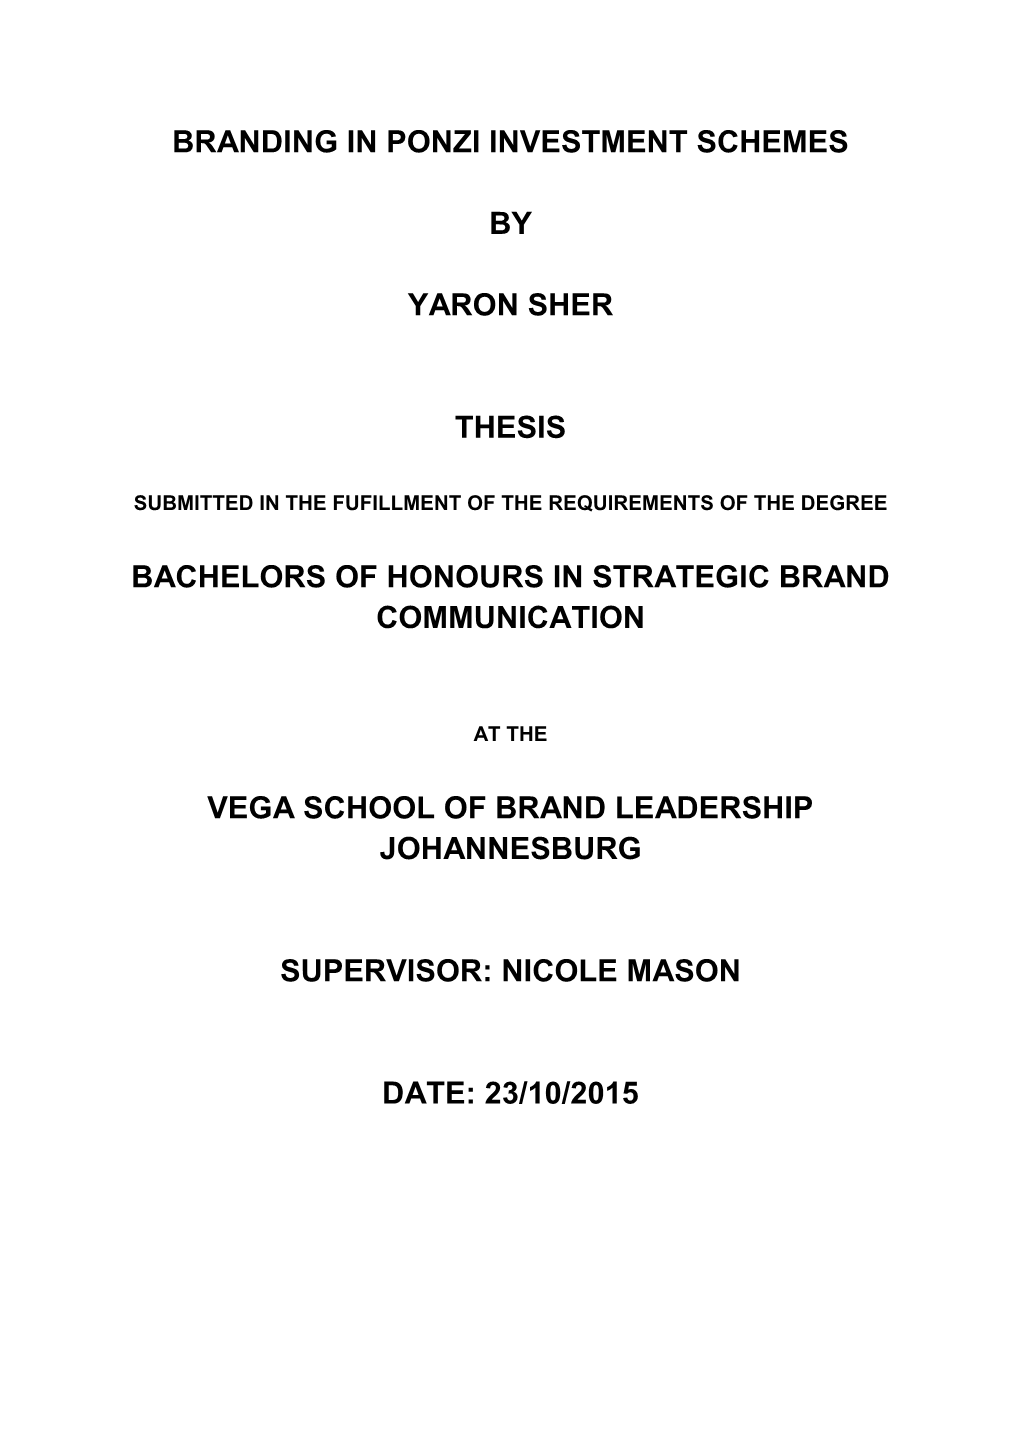 Branding in Ponzi Investment Schemes by Yaron Sher Thesis Bachelors of Honours in Strategic Brand Communication Vega School Of